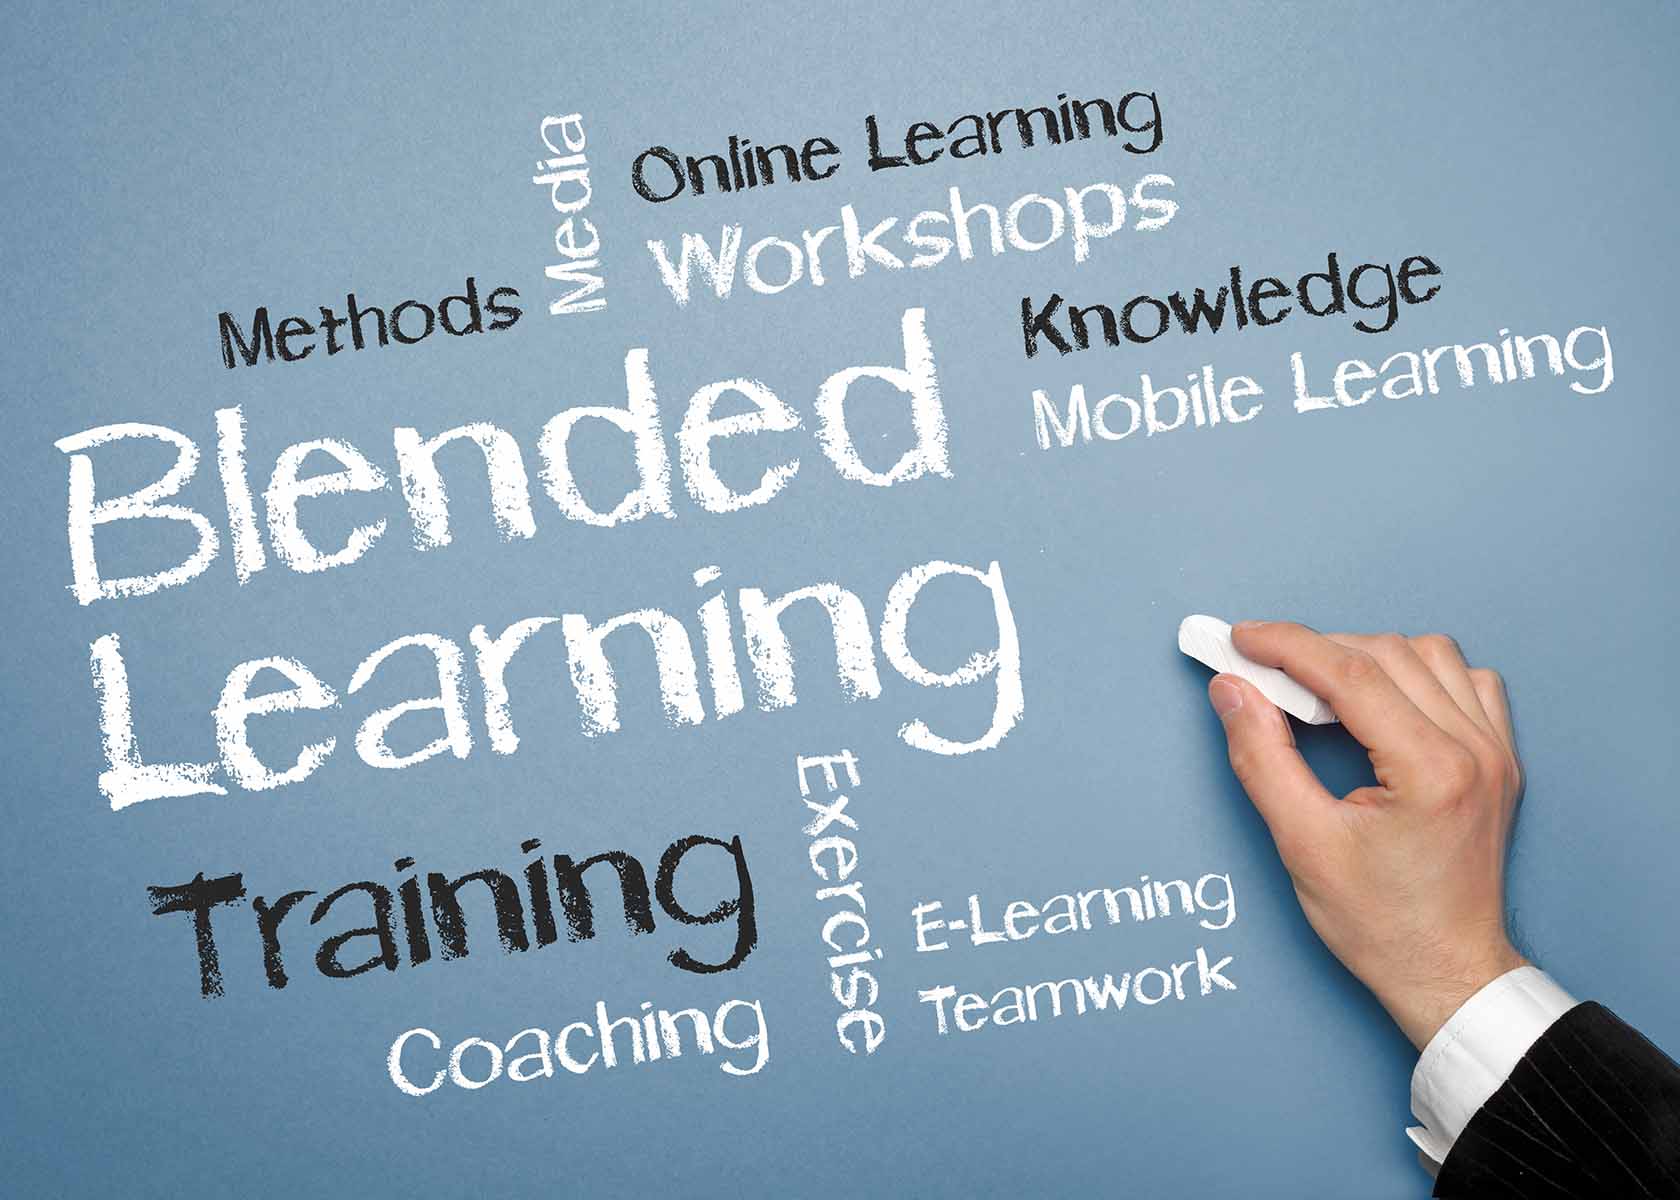 Unsere Lernformate - Blended Learning (840x600)